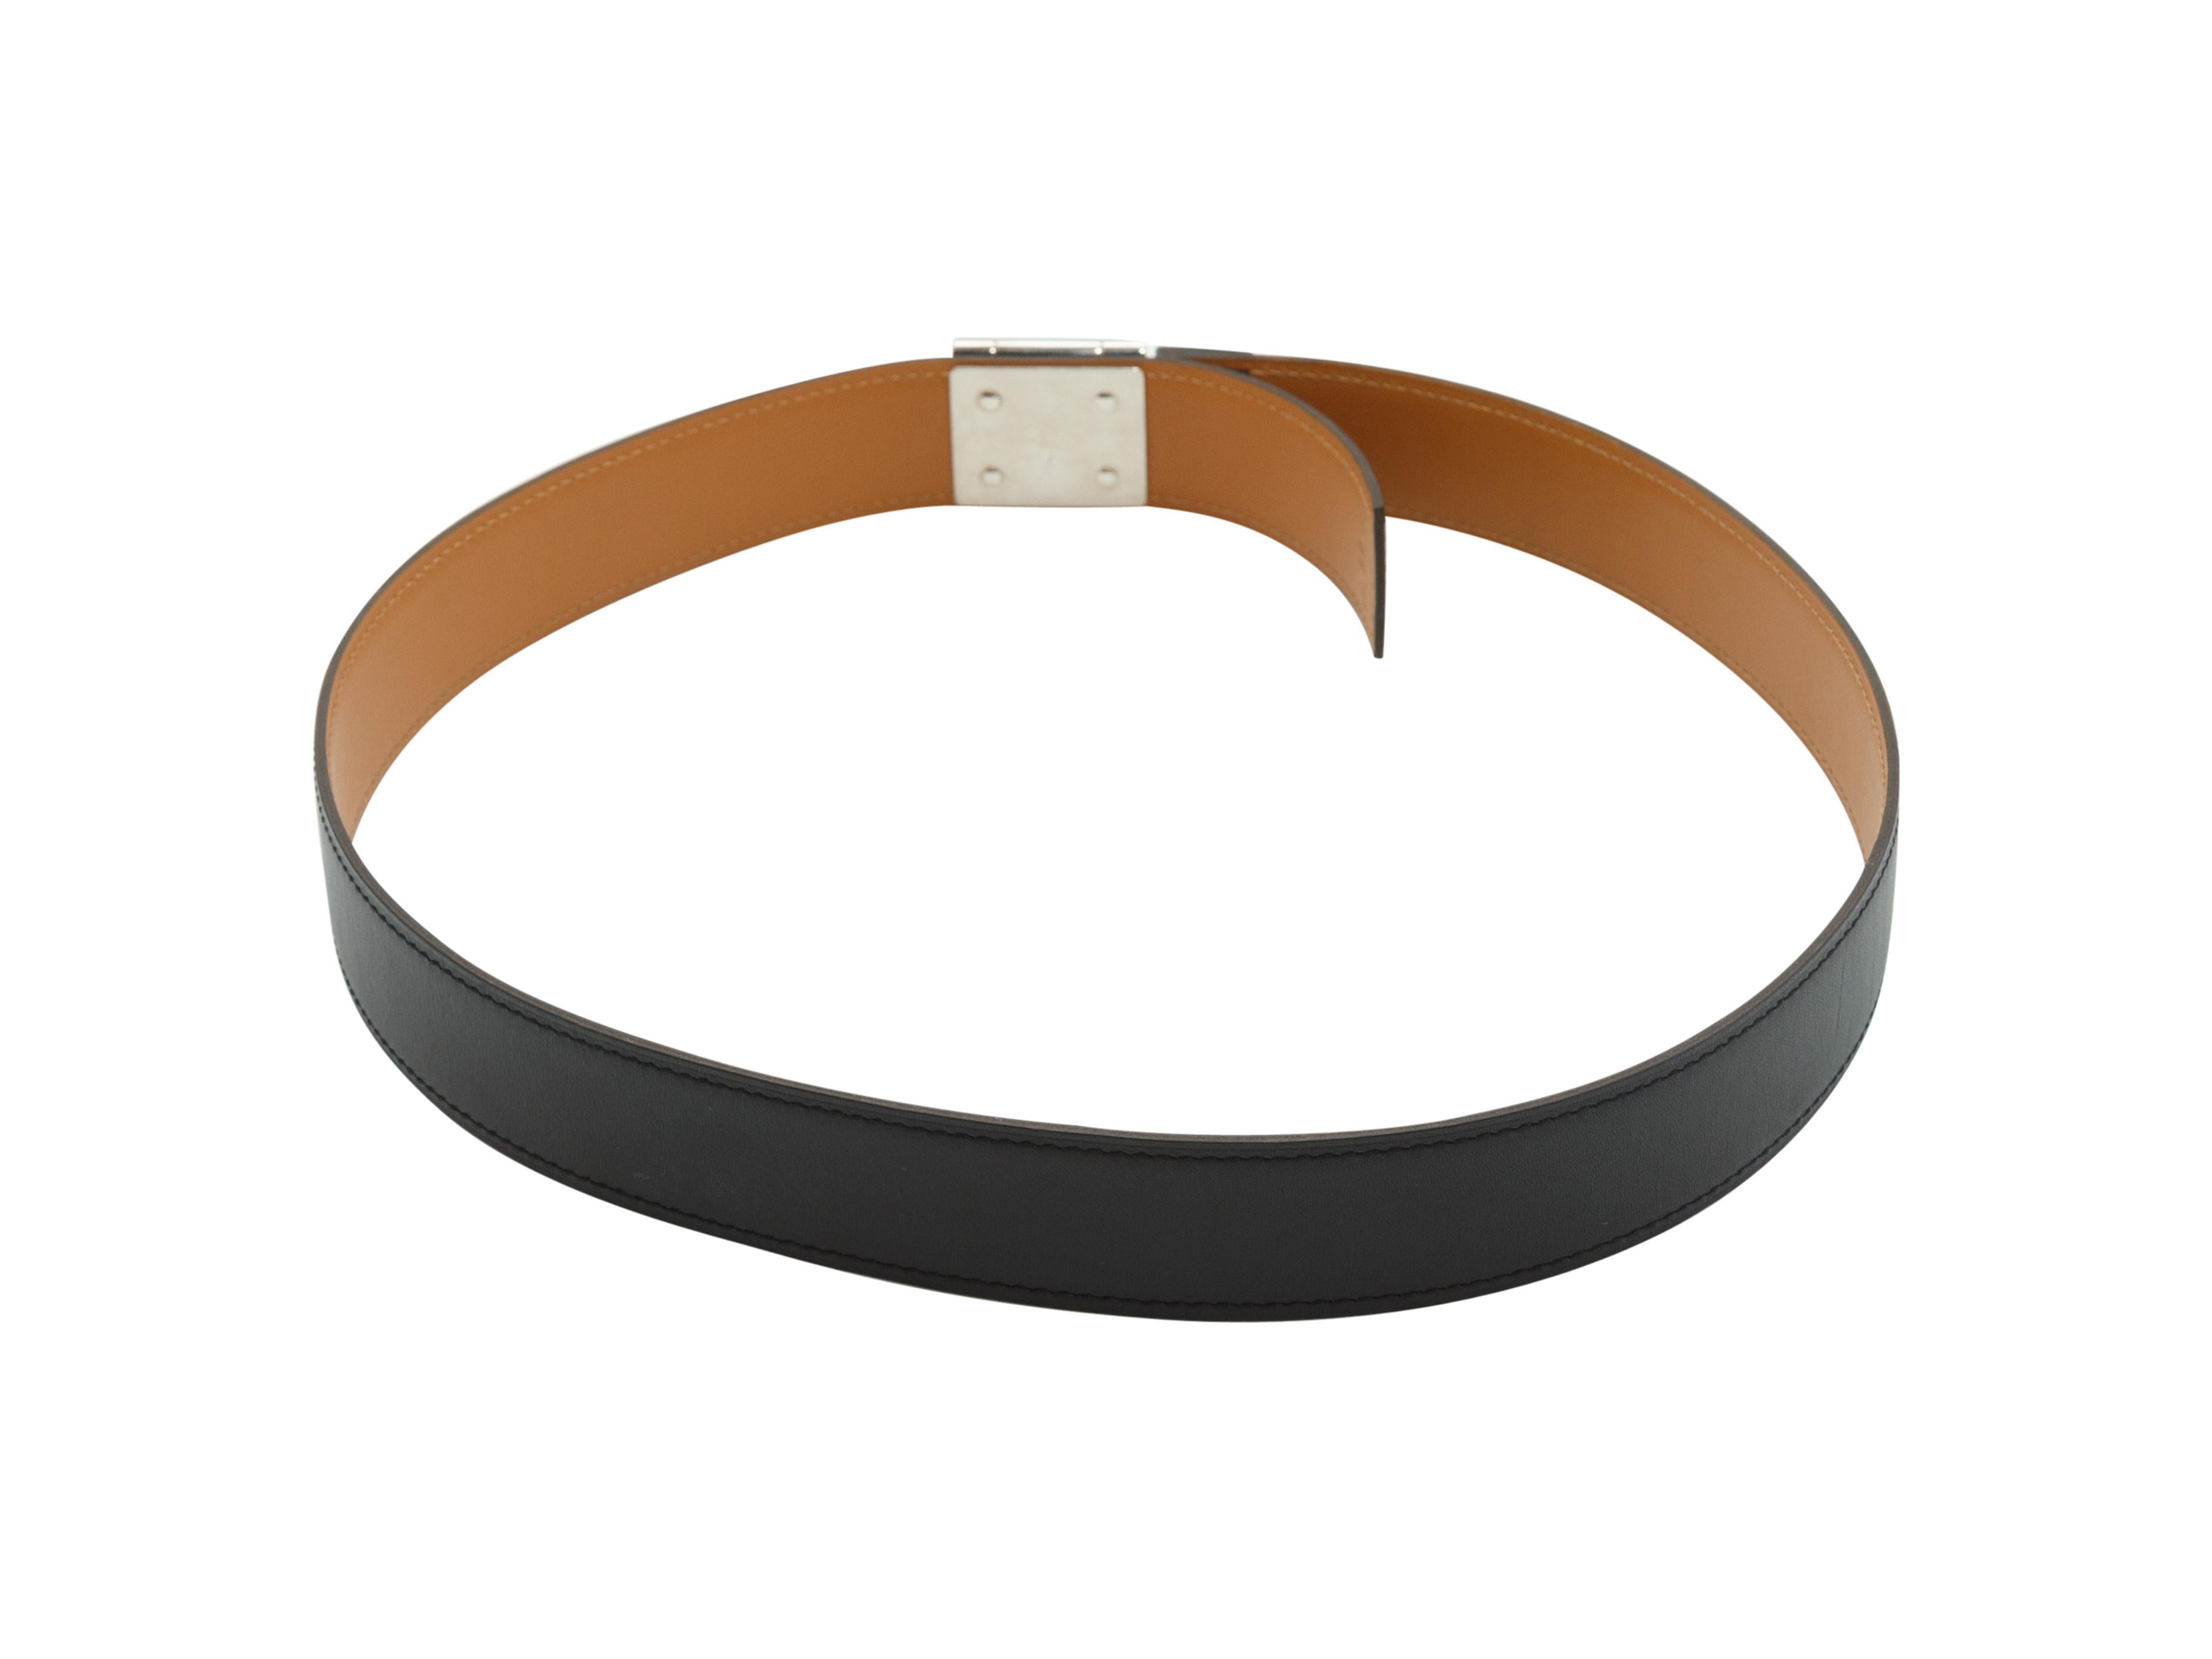 Product details: Black leather belt by Hermes. Tonal stitching throughout. Silver-tone closure at front. Designer size 85. 33